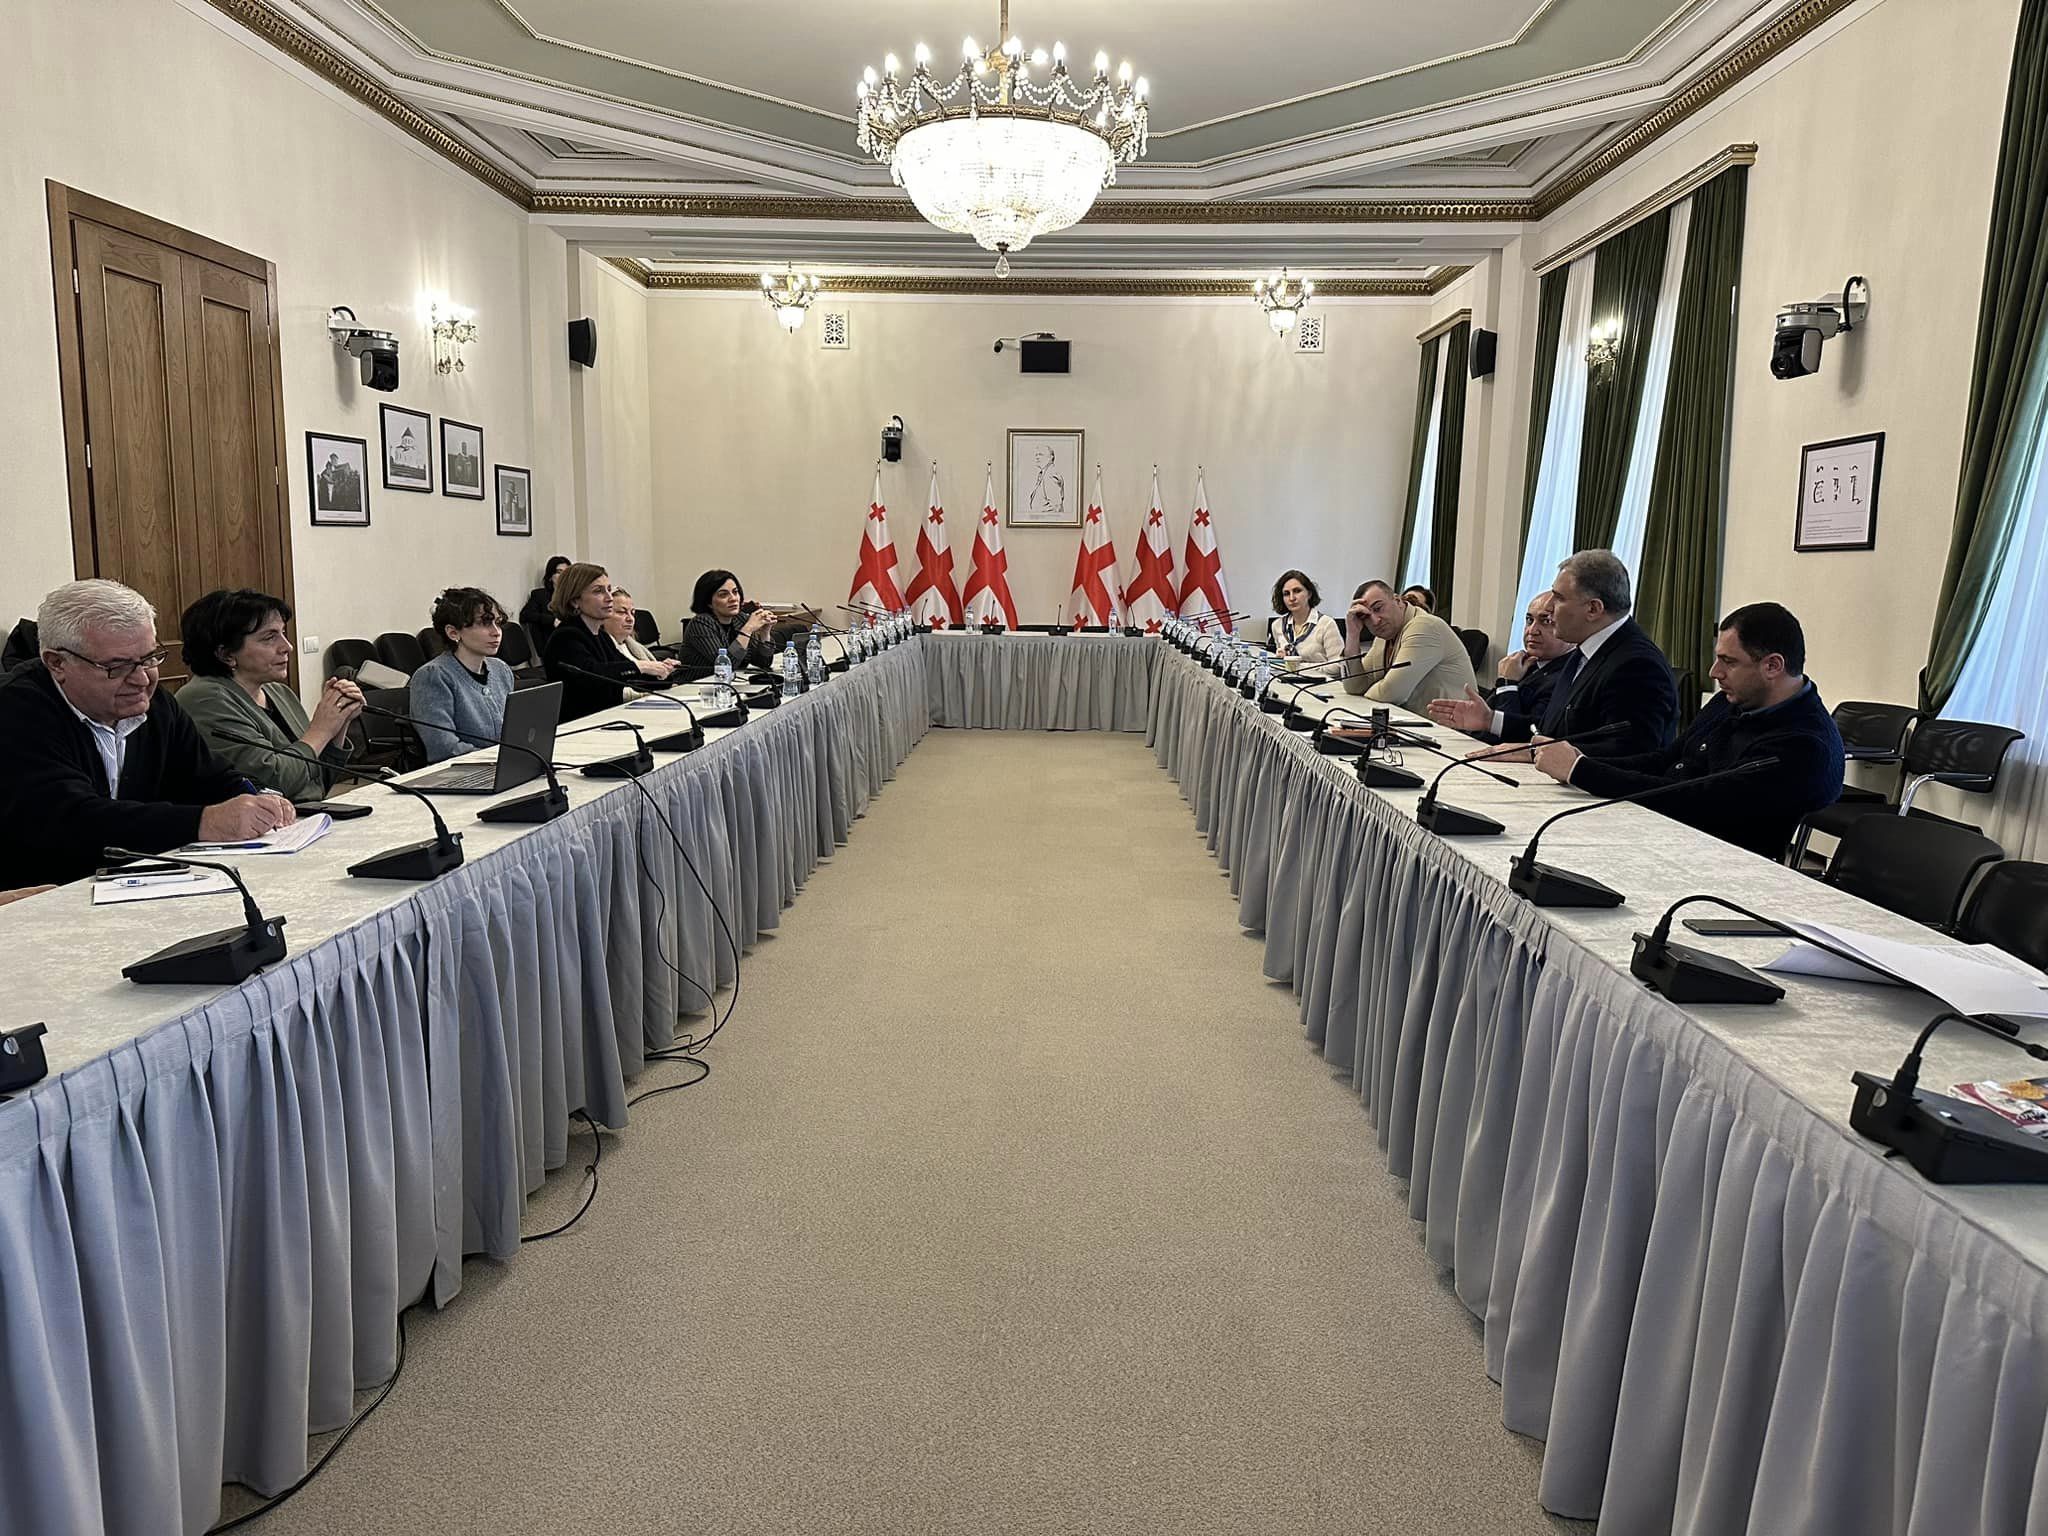 A joint coordination meeting was held in the Parliament of Georgia